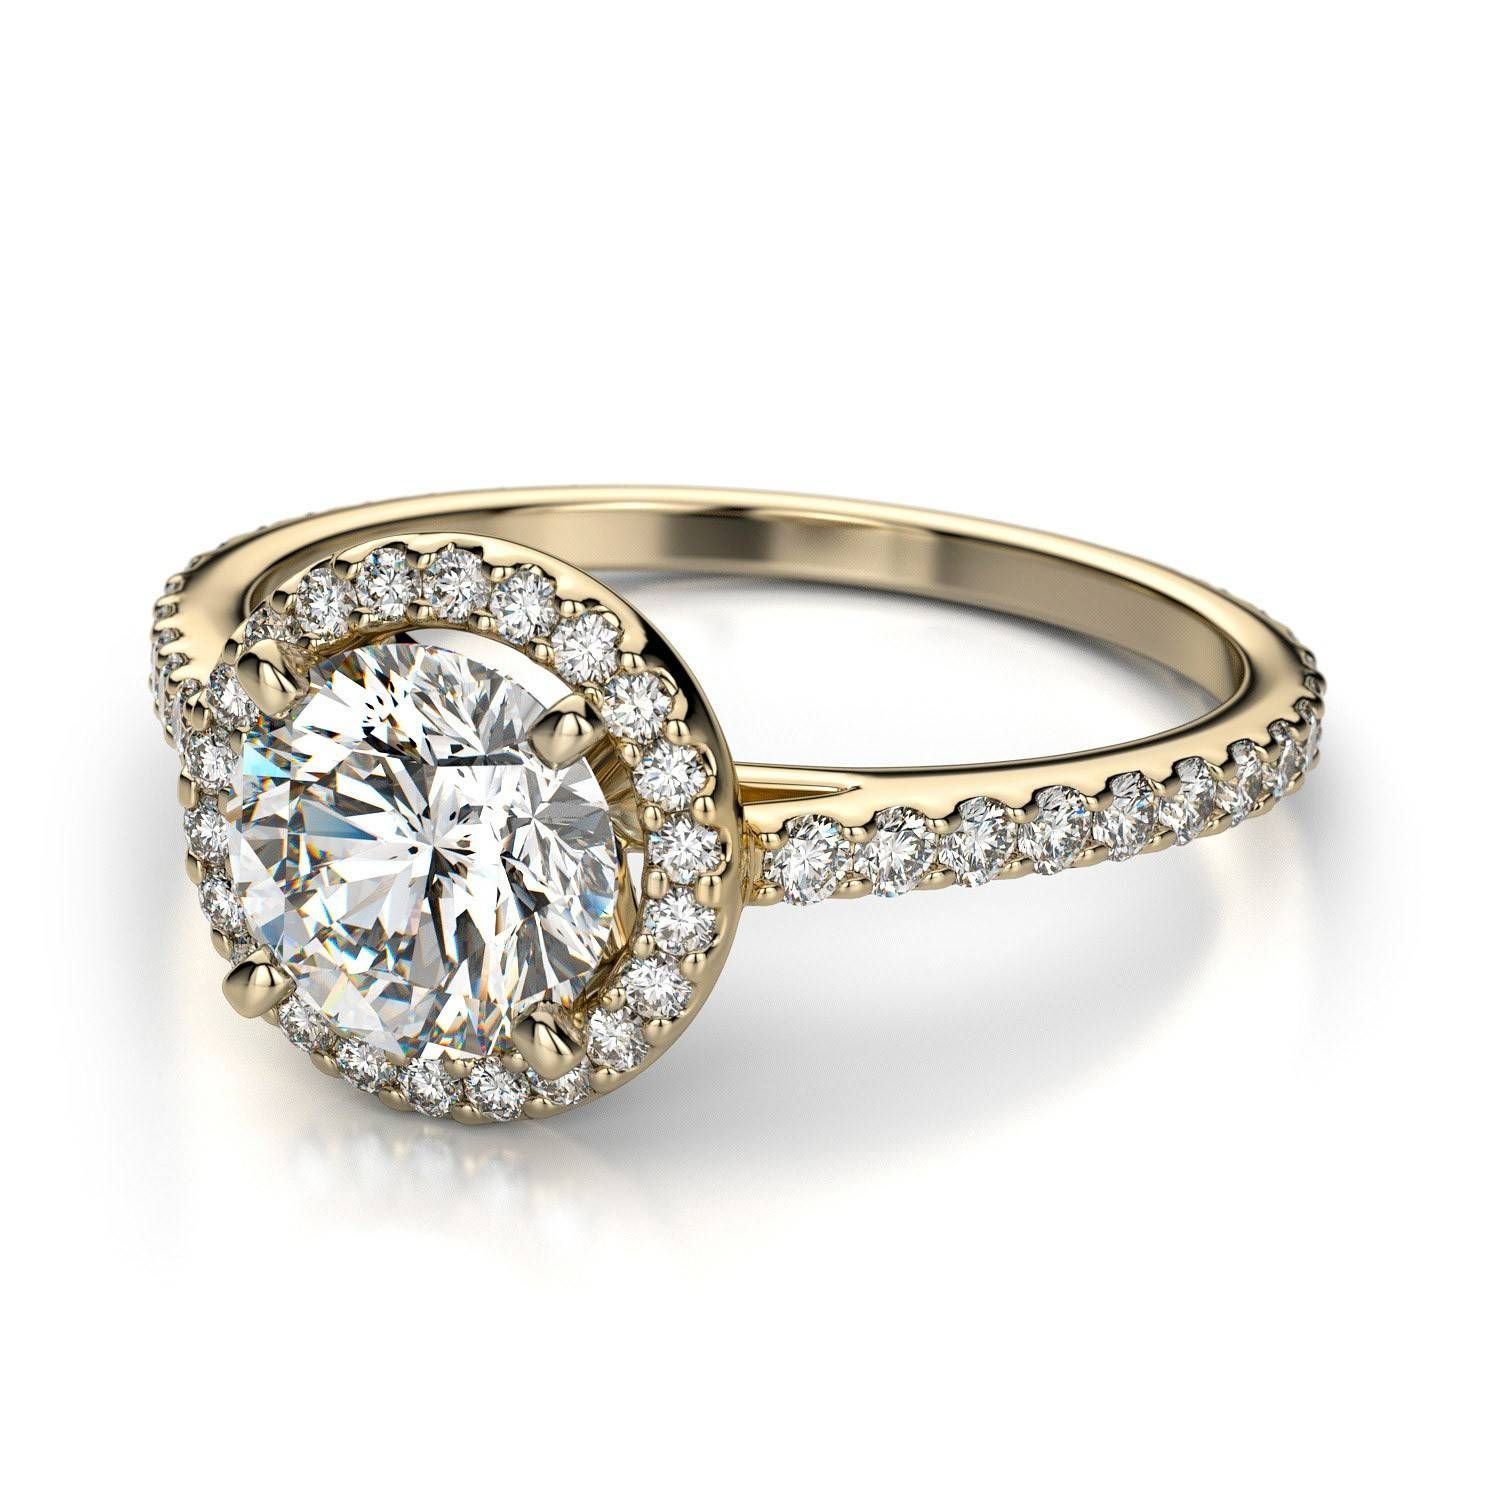 Yellow Gold Diamond Wedding Rings: More Than Beautiful | Ipunya In Gold Engagement And Wedding Rings (View 6 of 15)